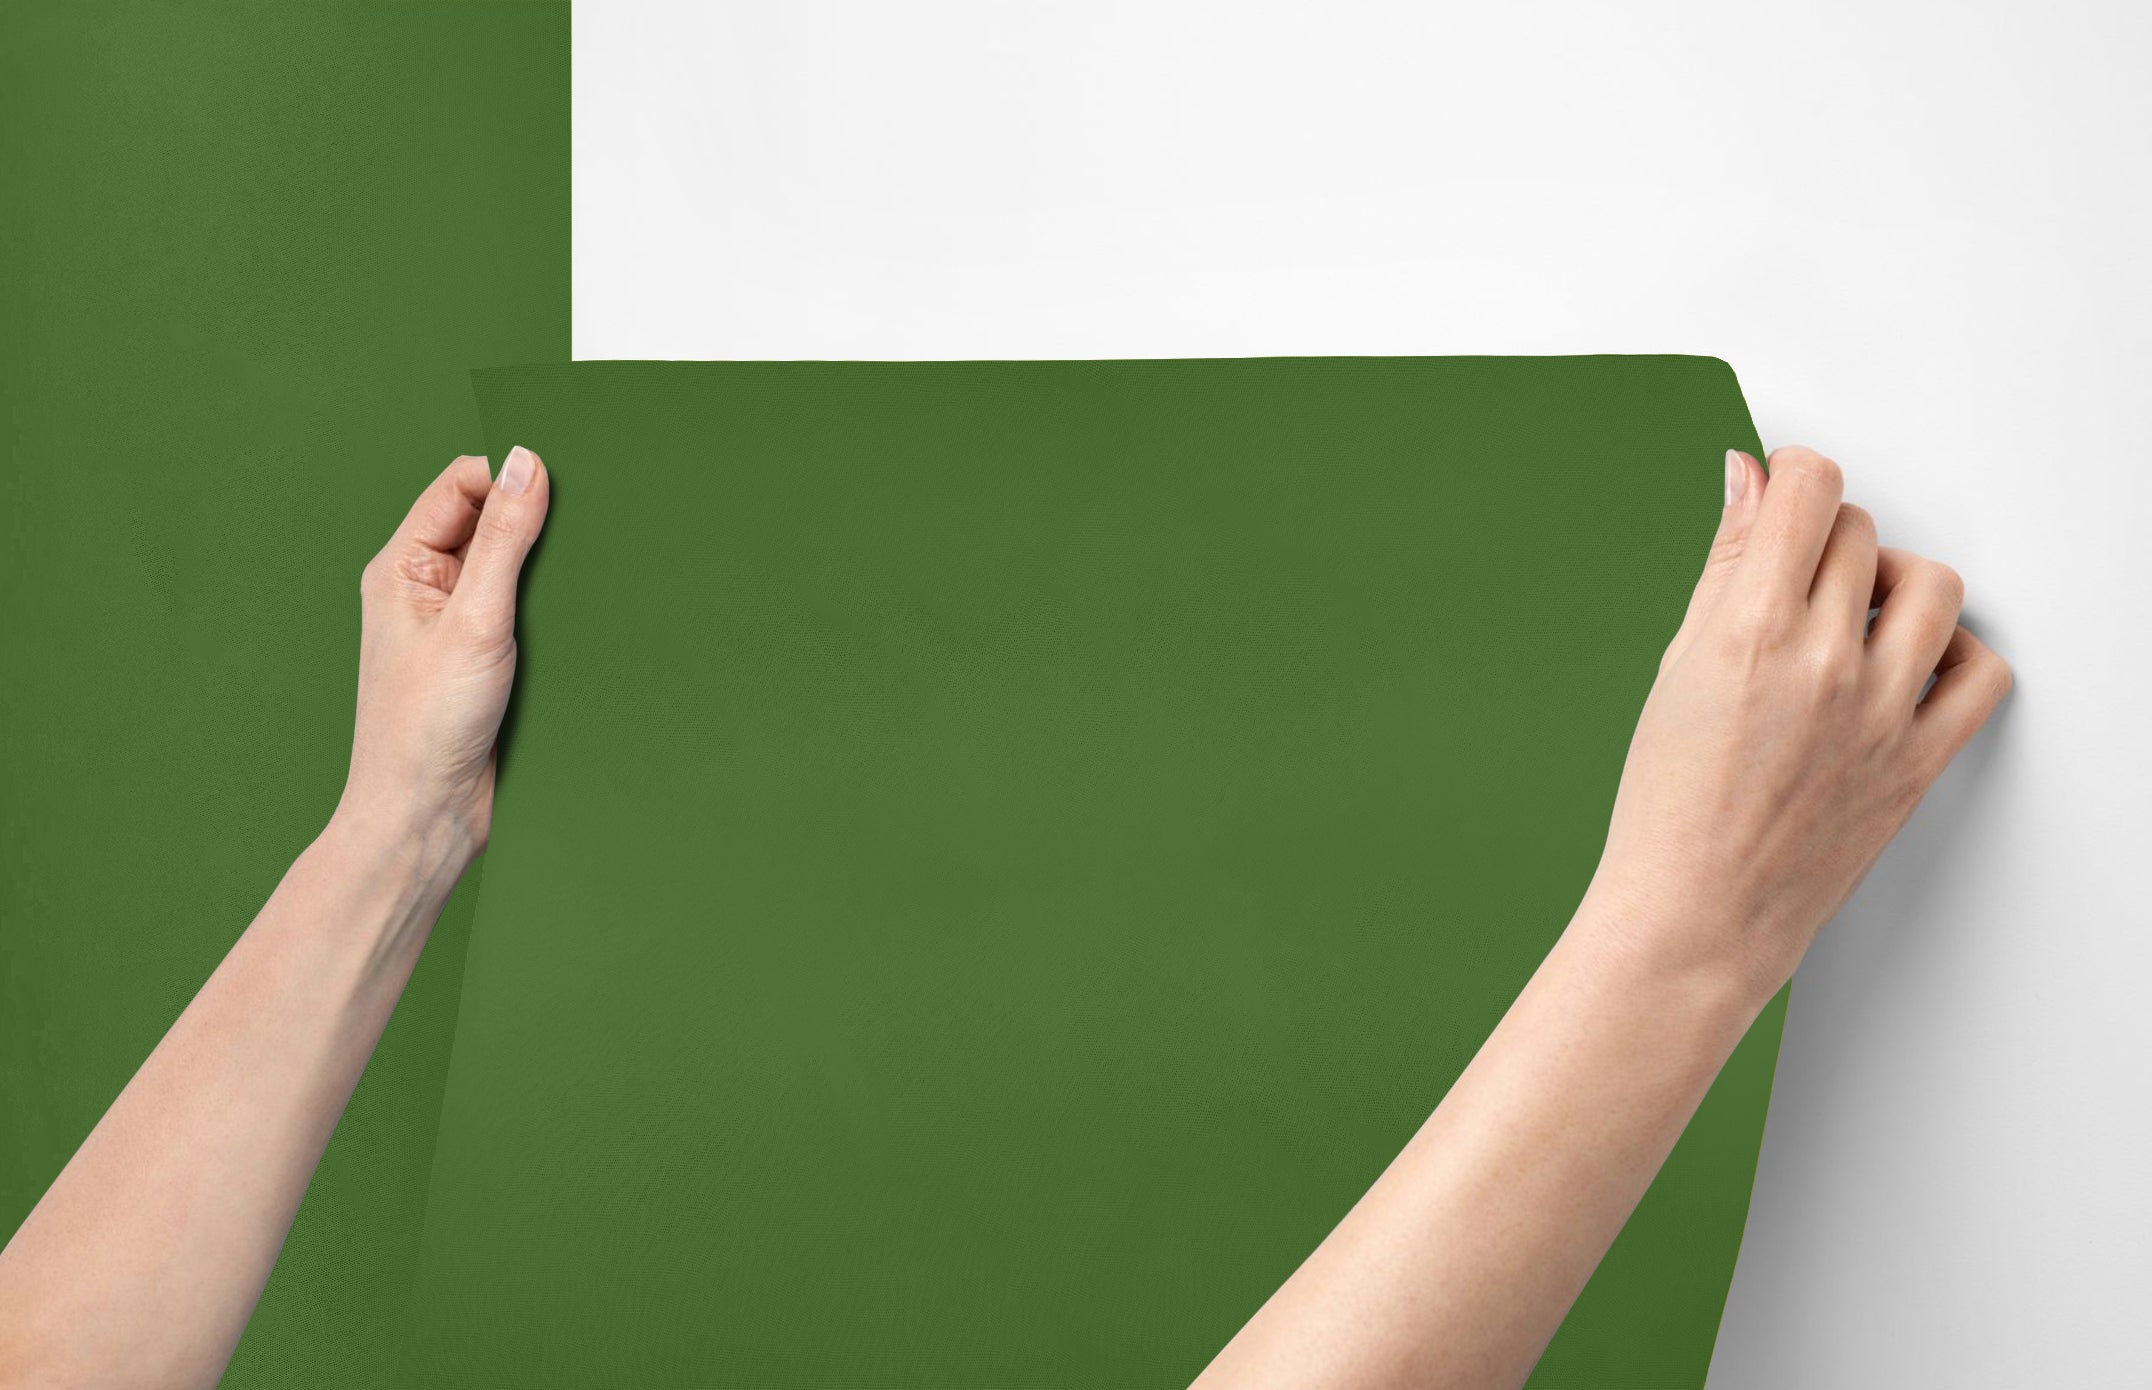 Peel & Stick Removable Re-usable Paint - Color RAL 6010 Grass Green - offRAL™ - RALRAW LLC, USA